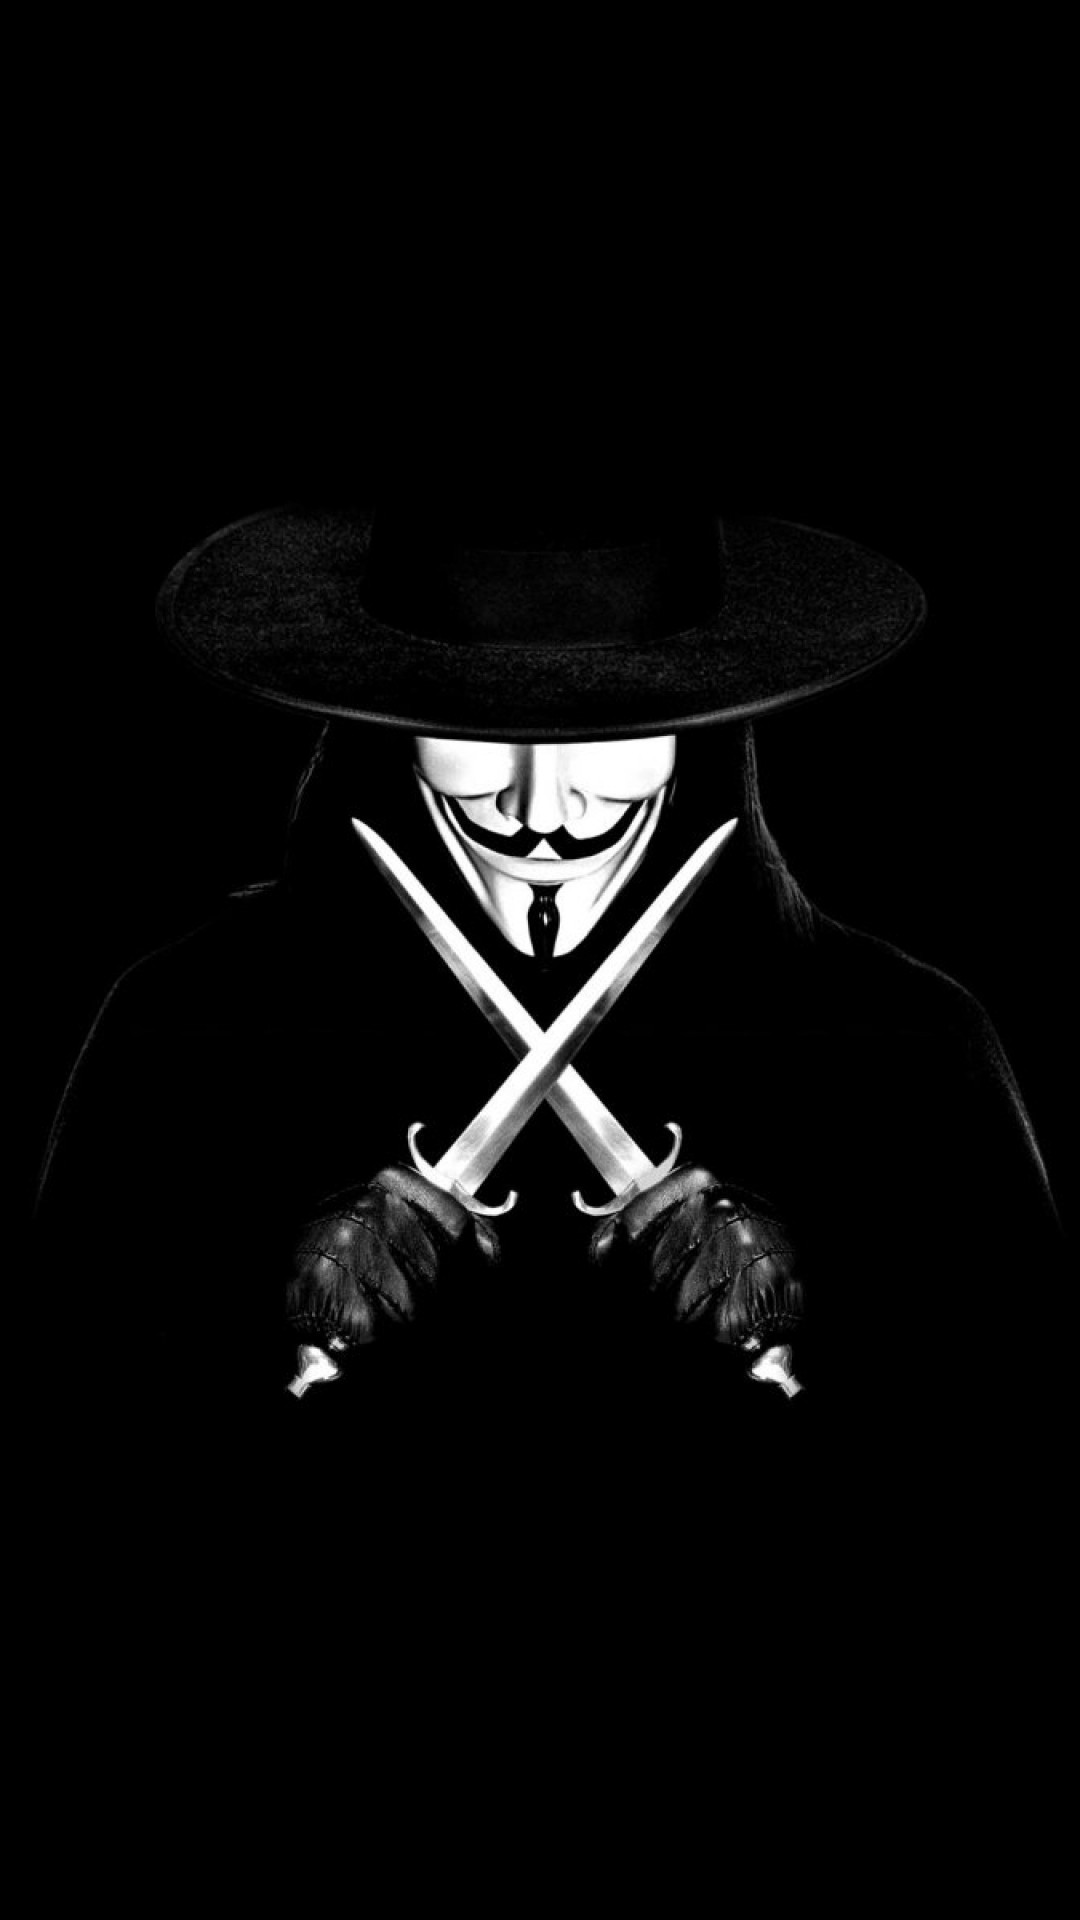 Download 1080x1920 V For Vendetta, Knives, Guy Fawkes Mask Wallpaper for iPhone iPhone 7 Plus, iPhone 6+, Sony Xperia Z, HTC One